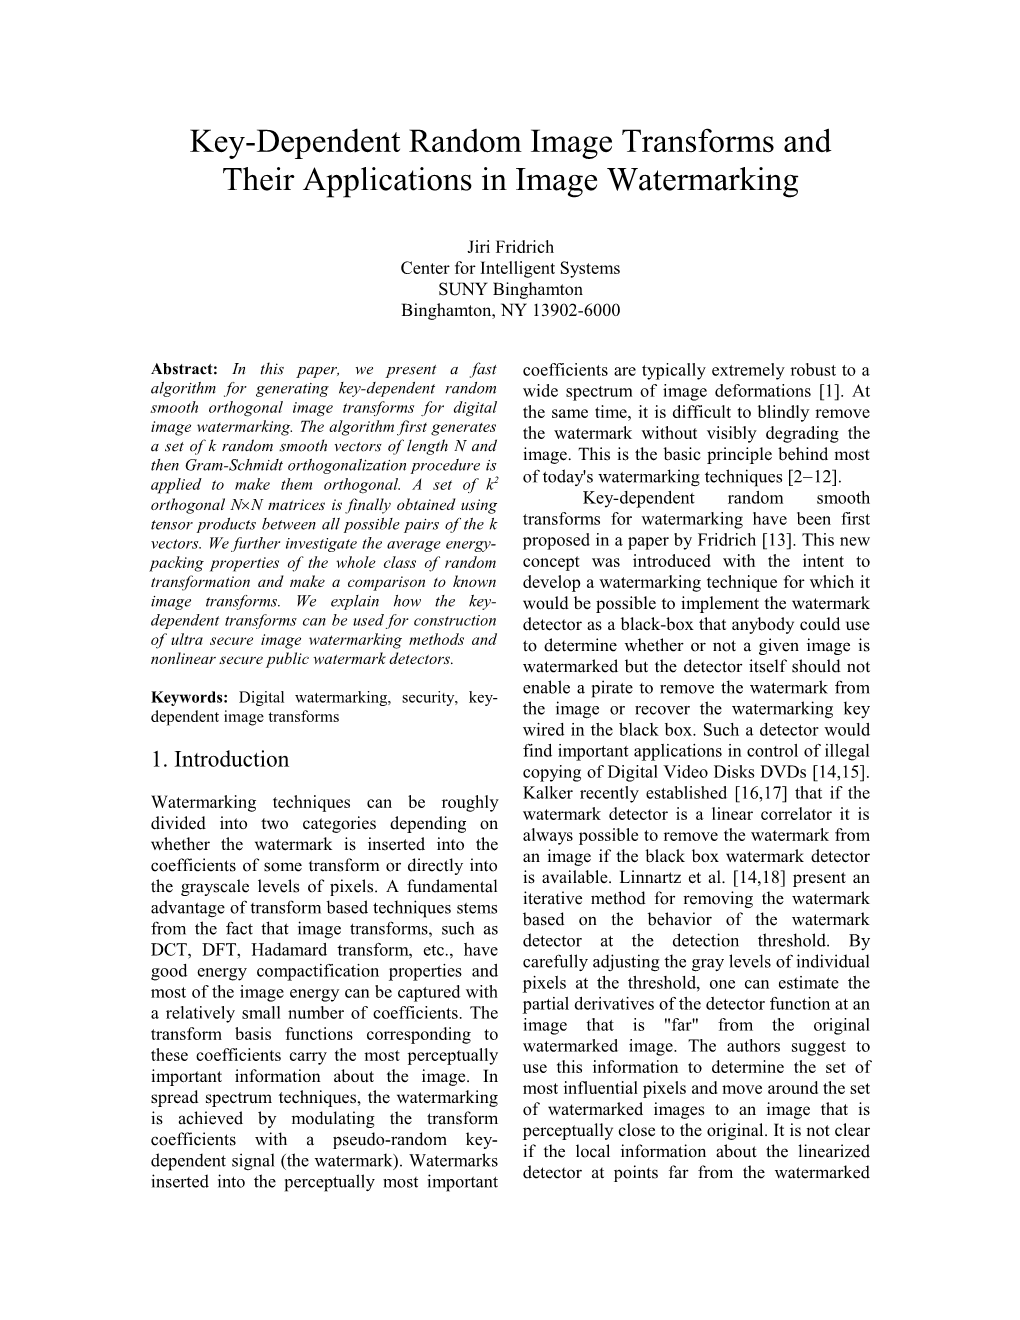 Title: Key-Dependent Random Image Transforms and Their Applications in Image Watermarking